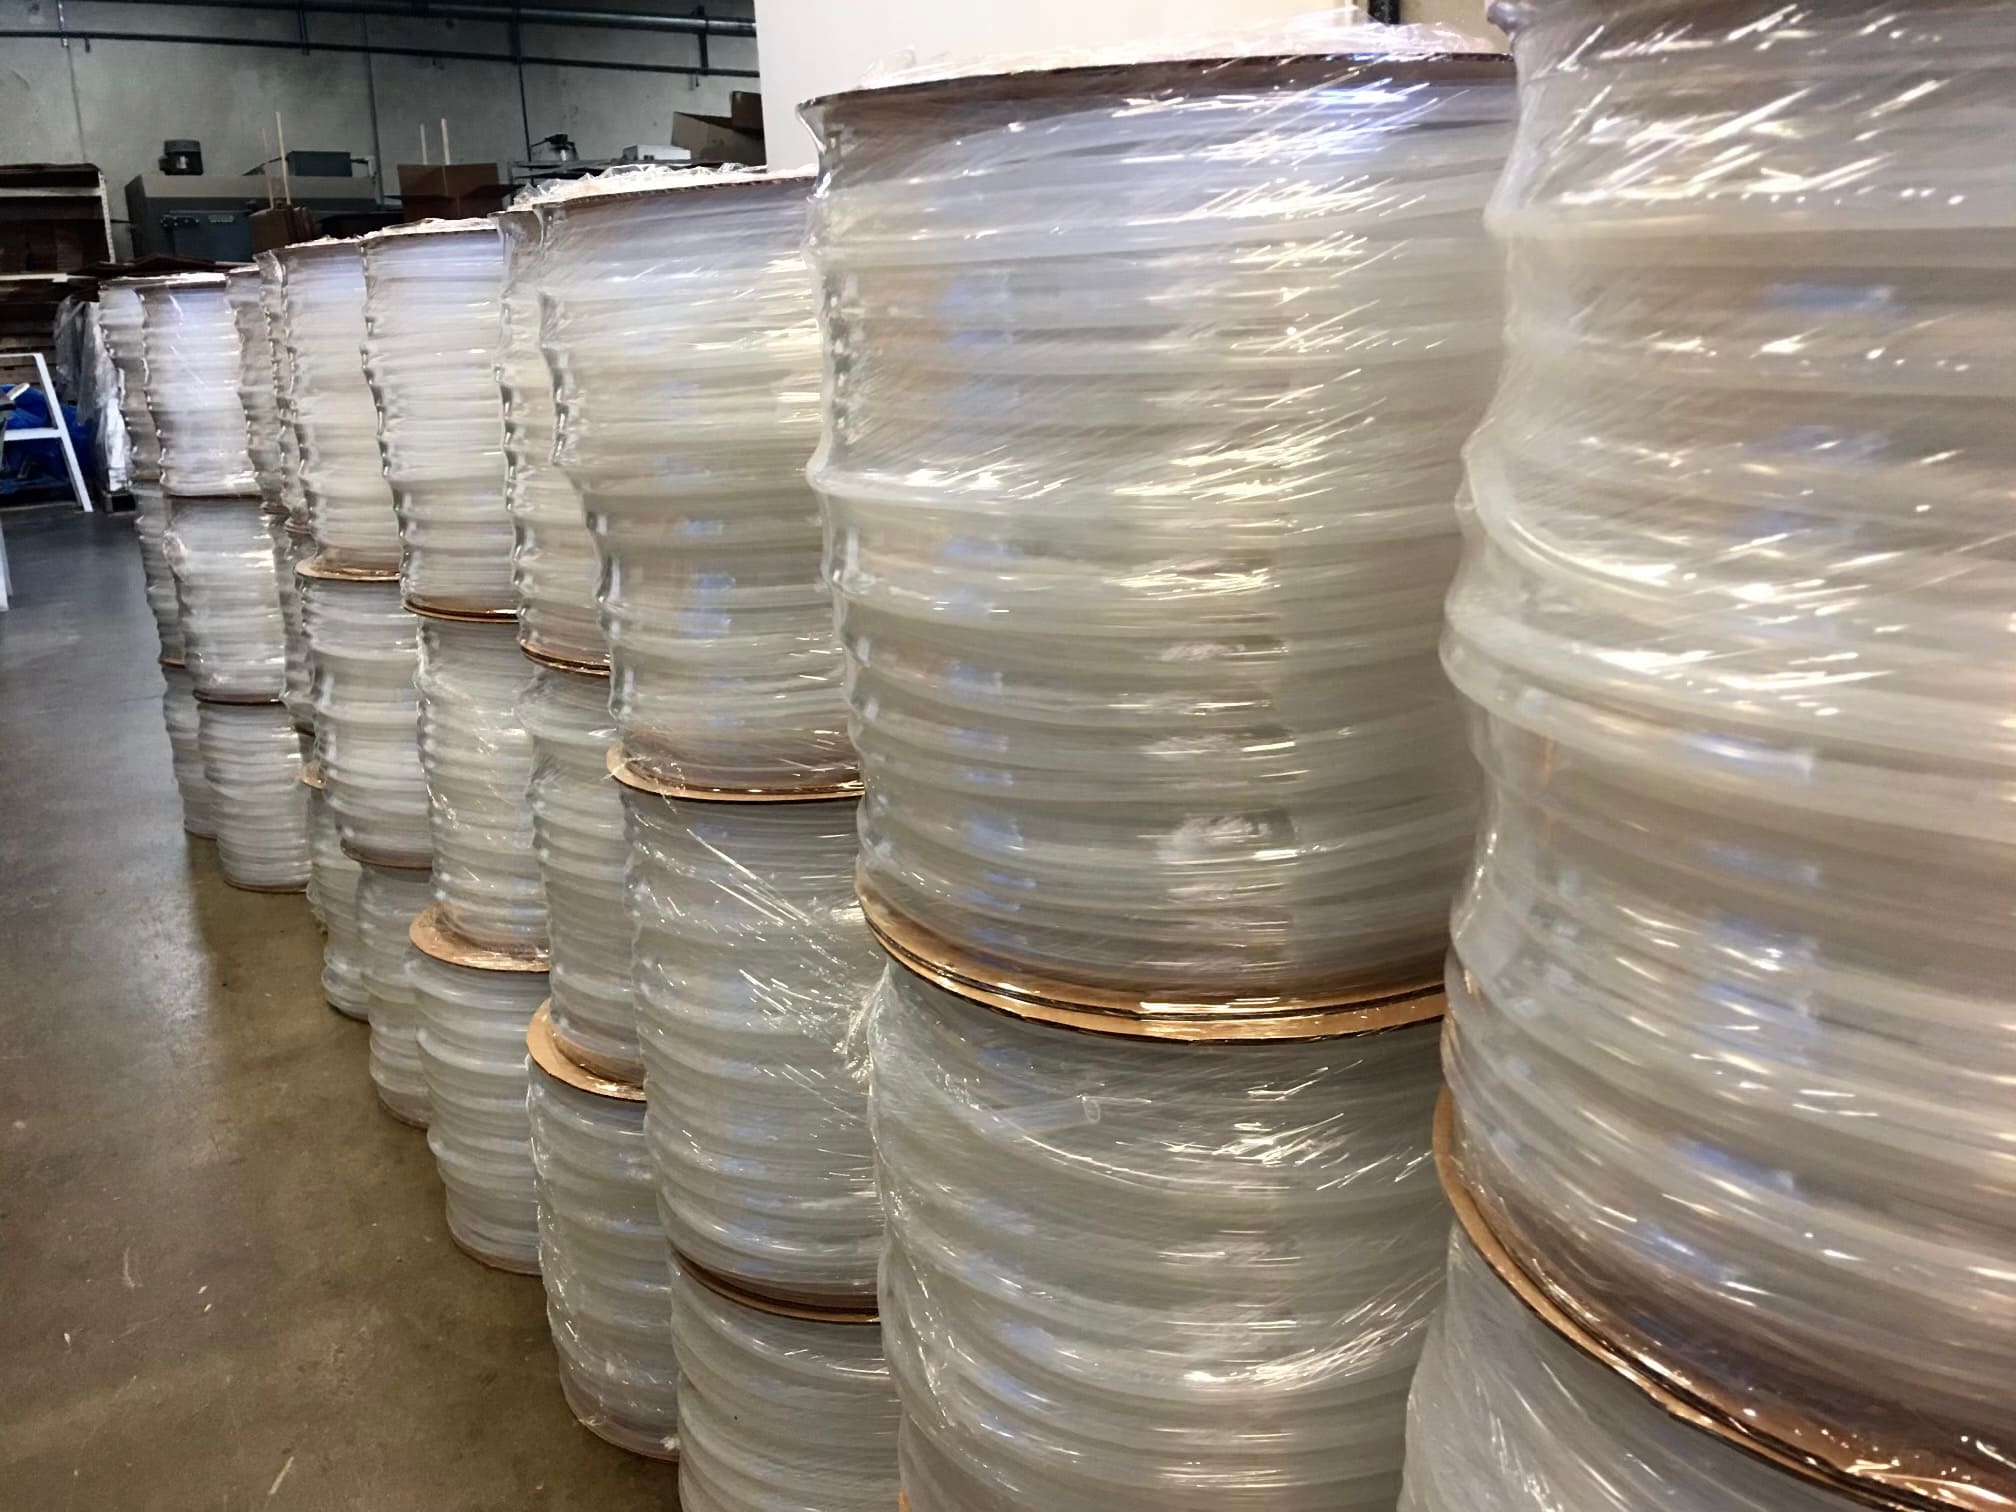 Stacks of spools of clear silicone rubber tubing